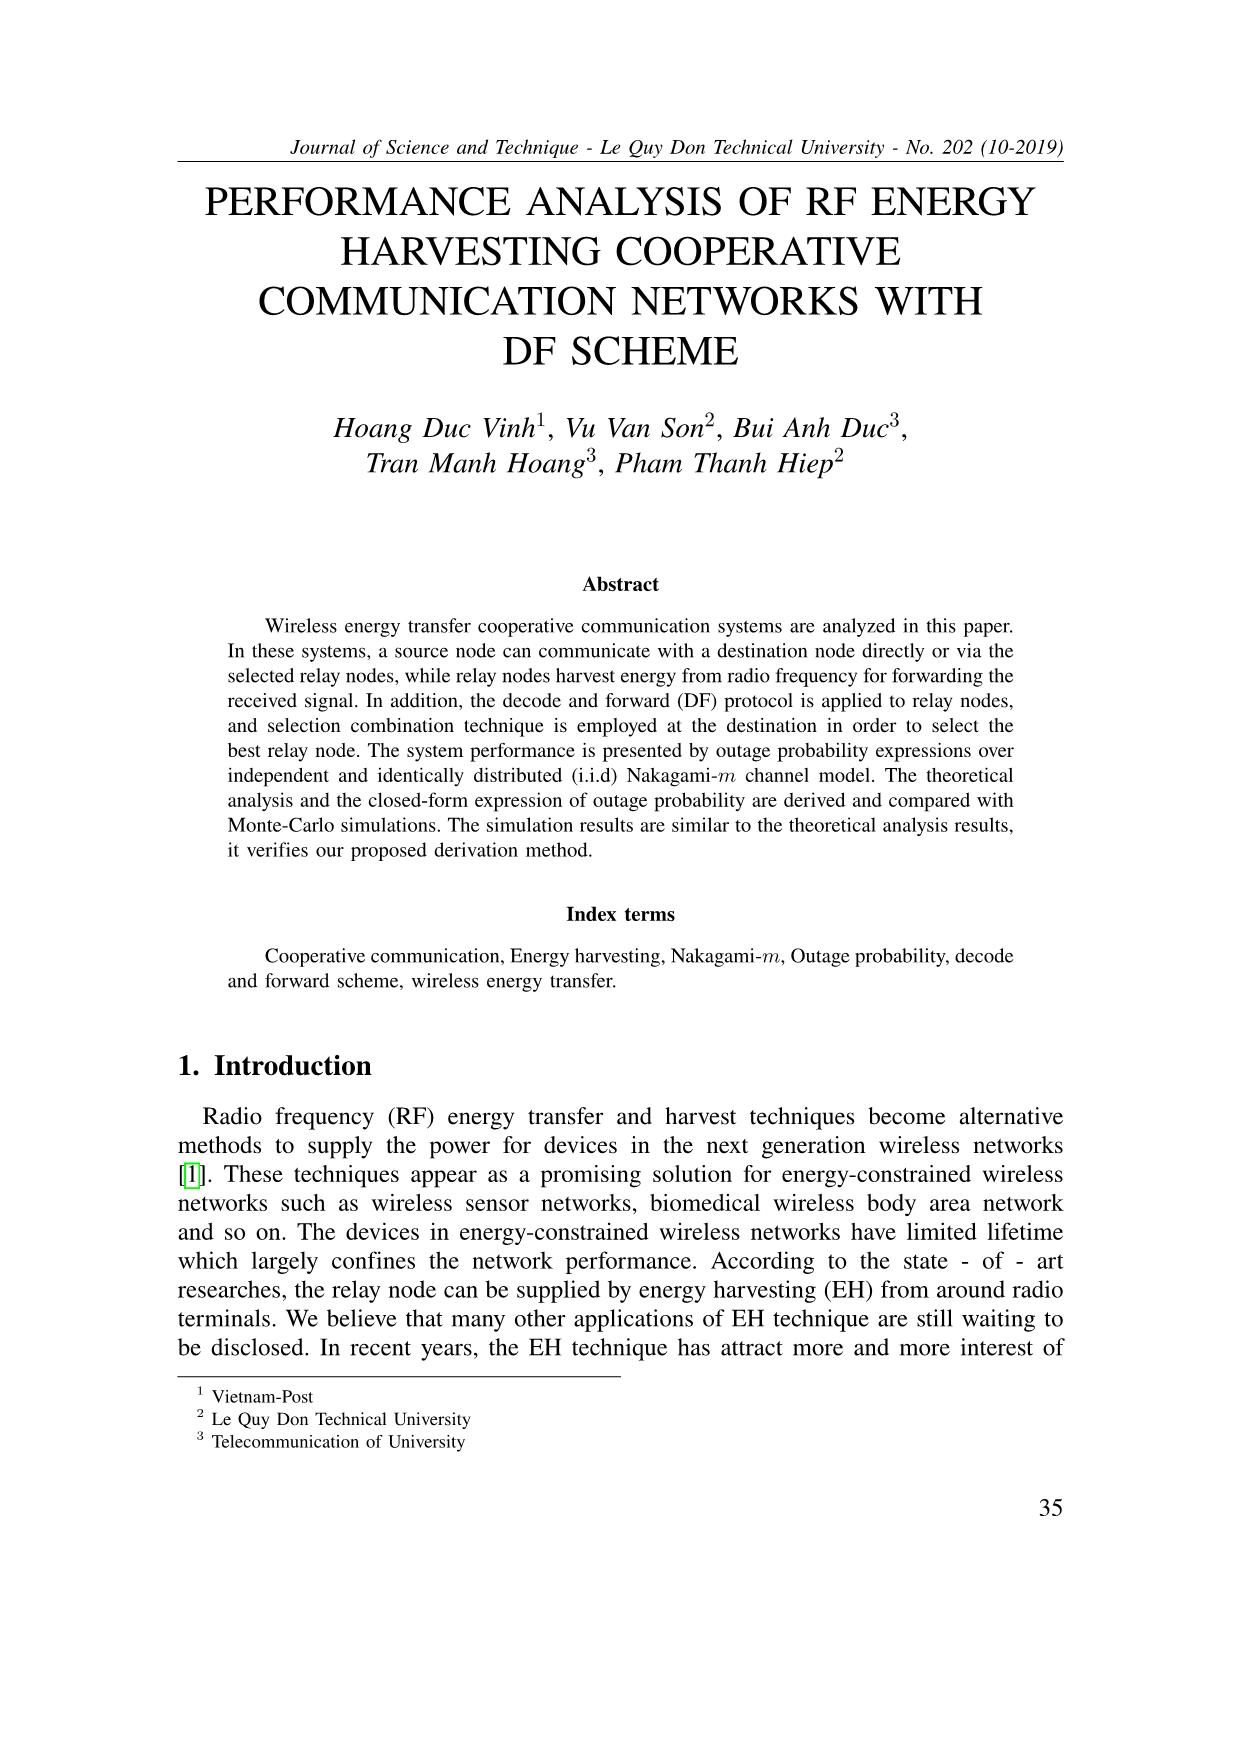 Performance analysis of rf energy harvesting cooperative communication networks with DF scheme trang 1